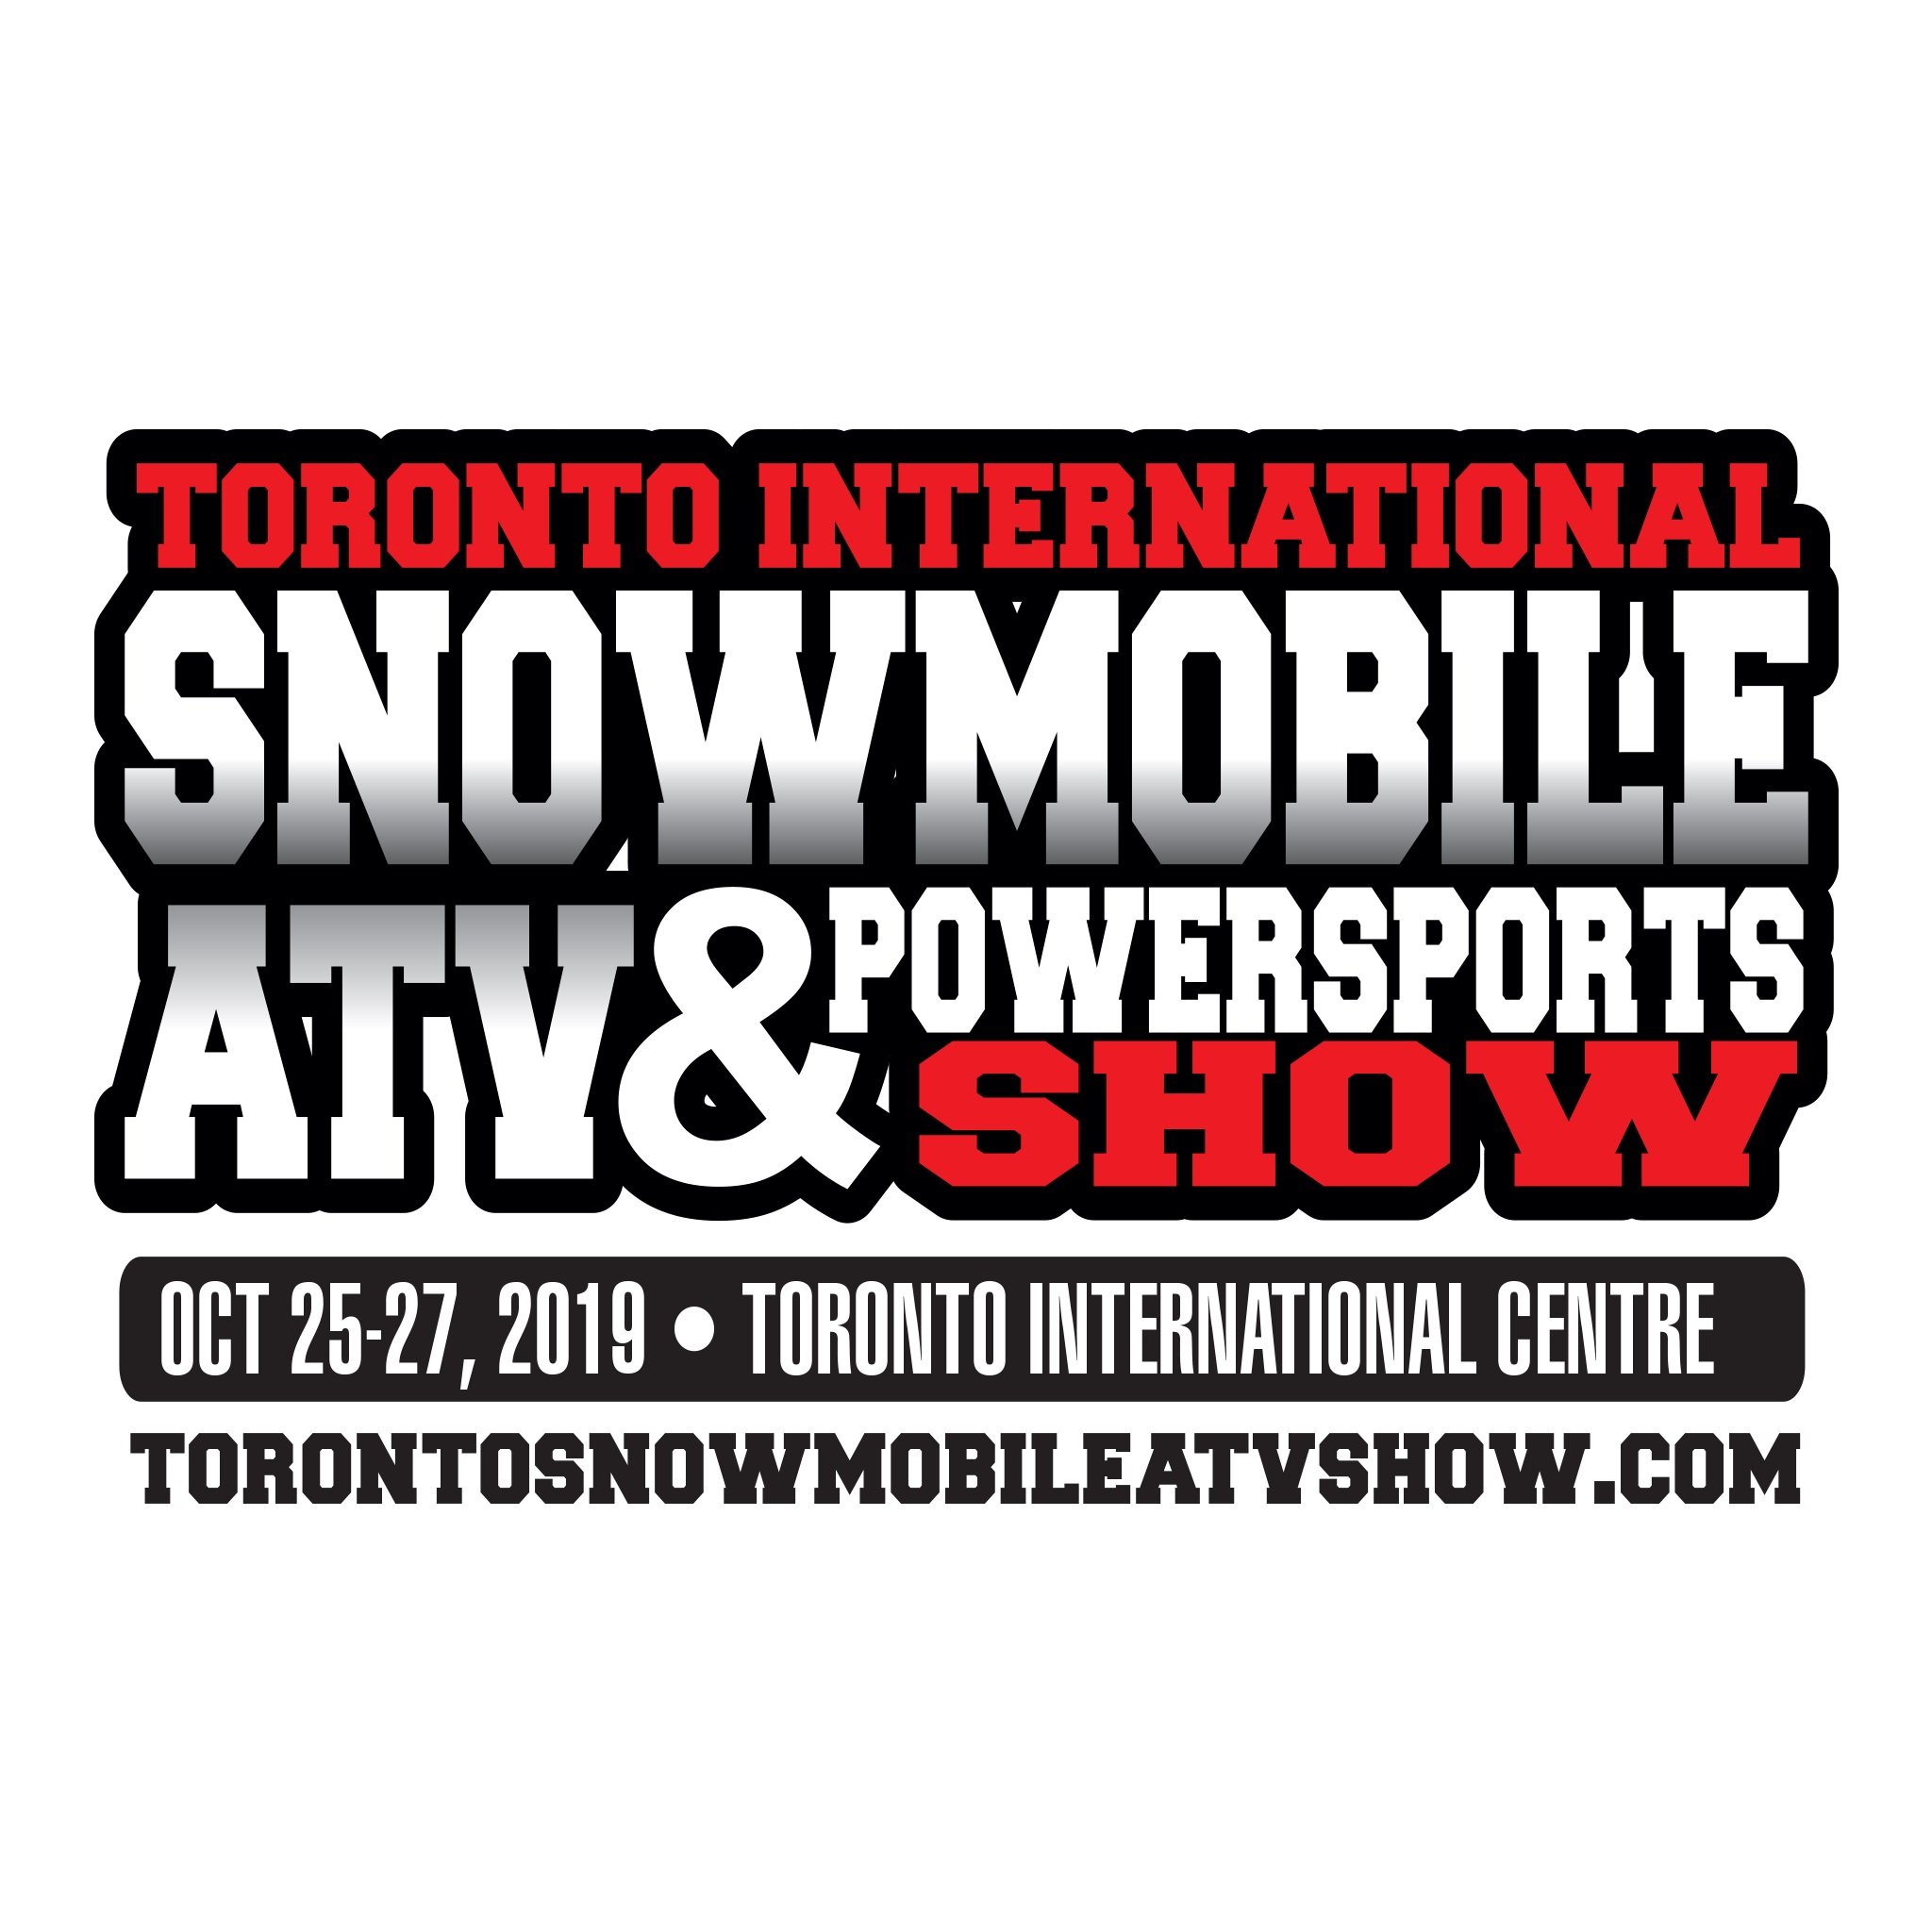 The BIG SHOW by the Airport, The WORLD’S LARGEST Snowmobile & ATV Show, the show to bring your entire family to and meet up with your friends.